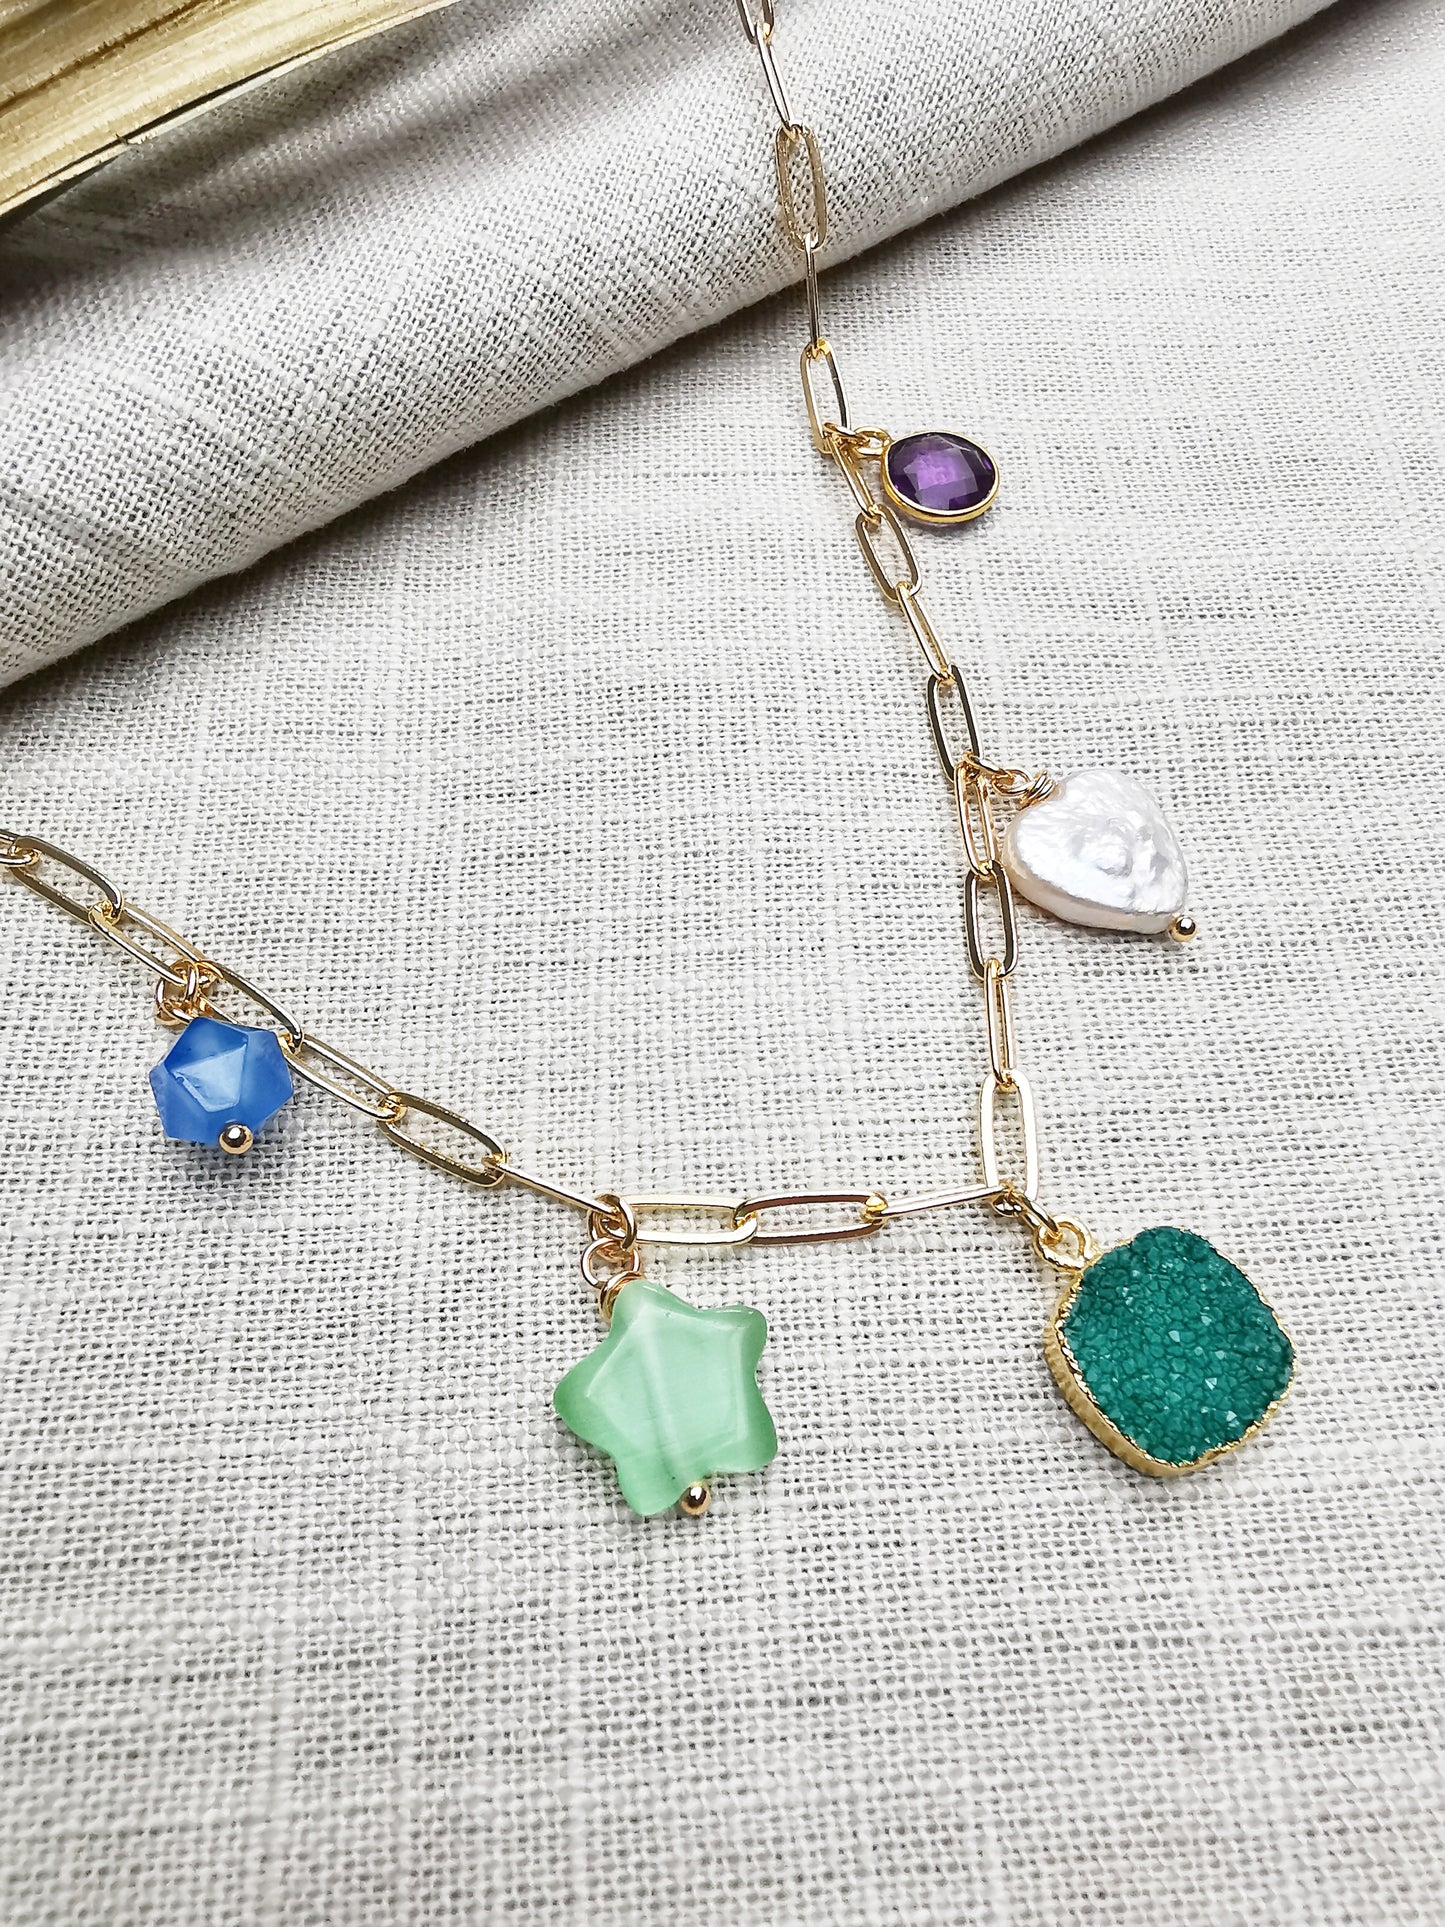 CANDY - Multi-gemstone  Chain Necklace.